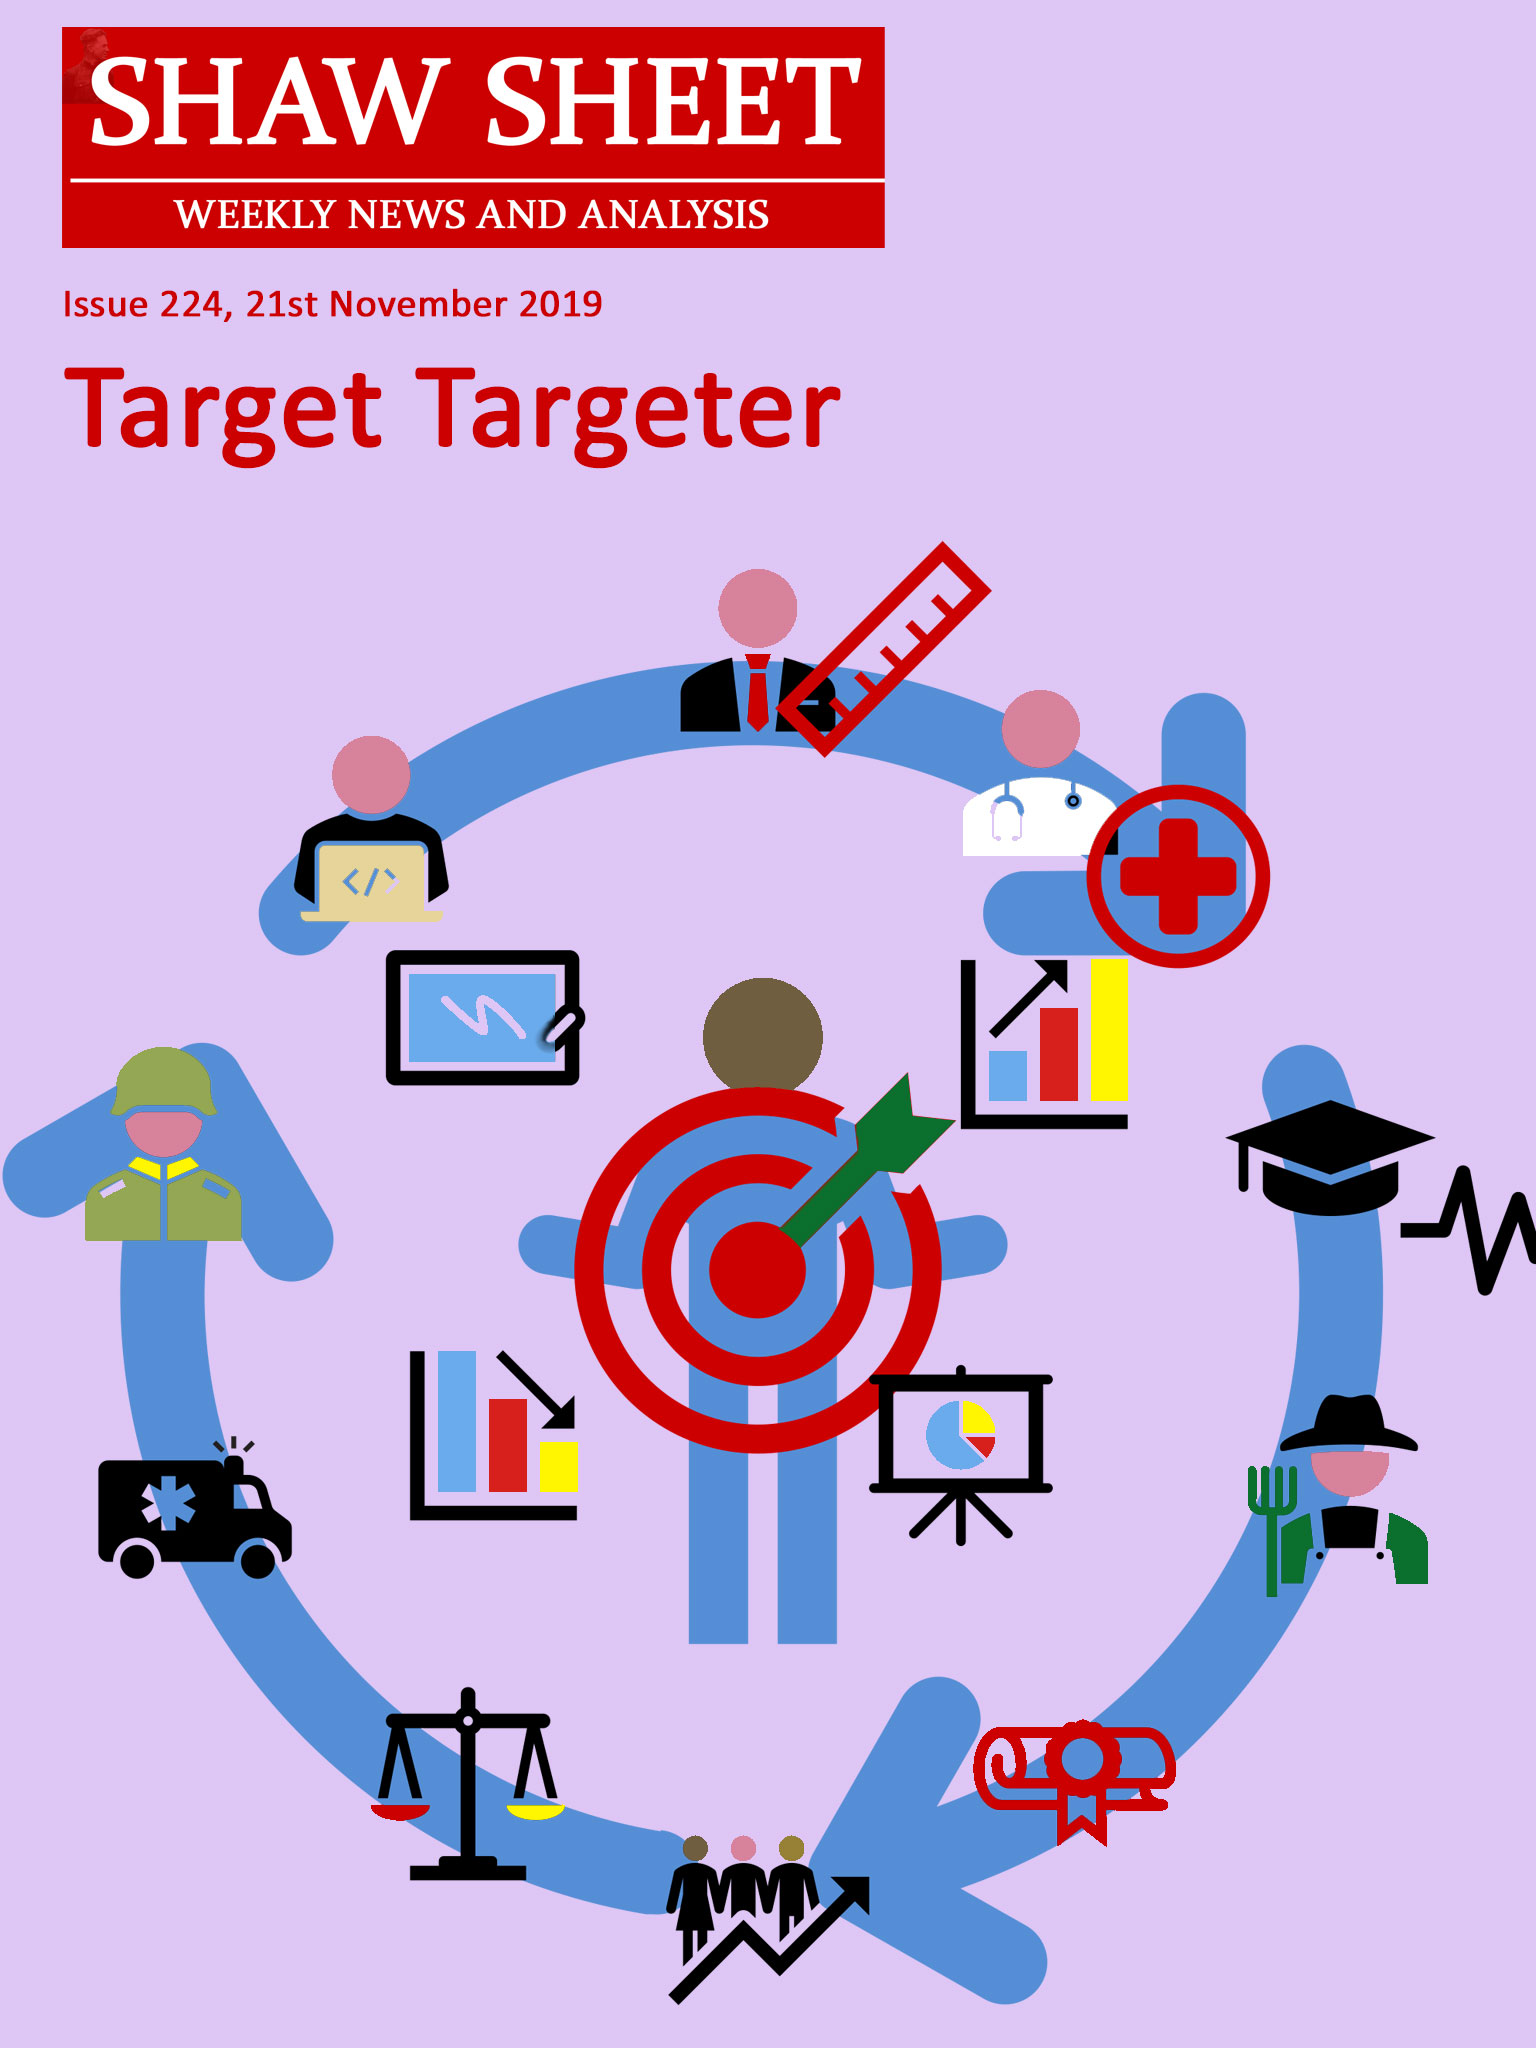 A circular target set by a person for government activities along with charts going up and down